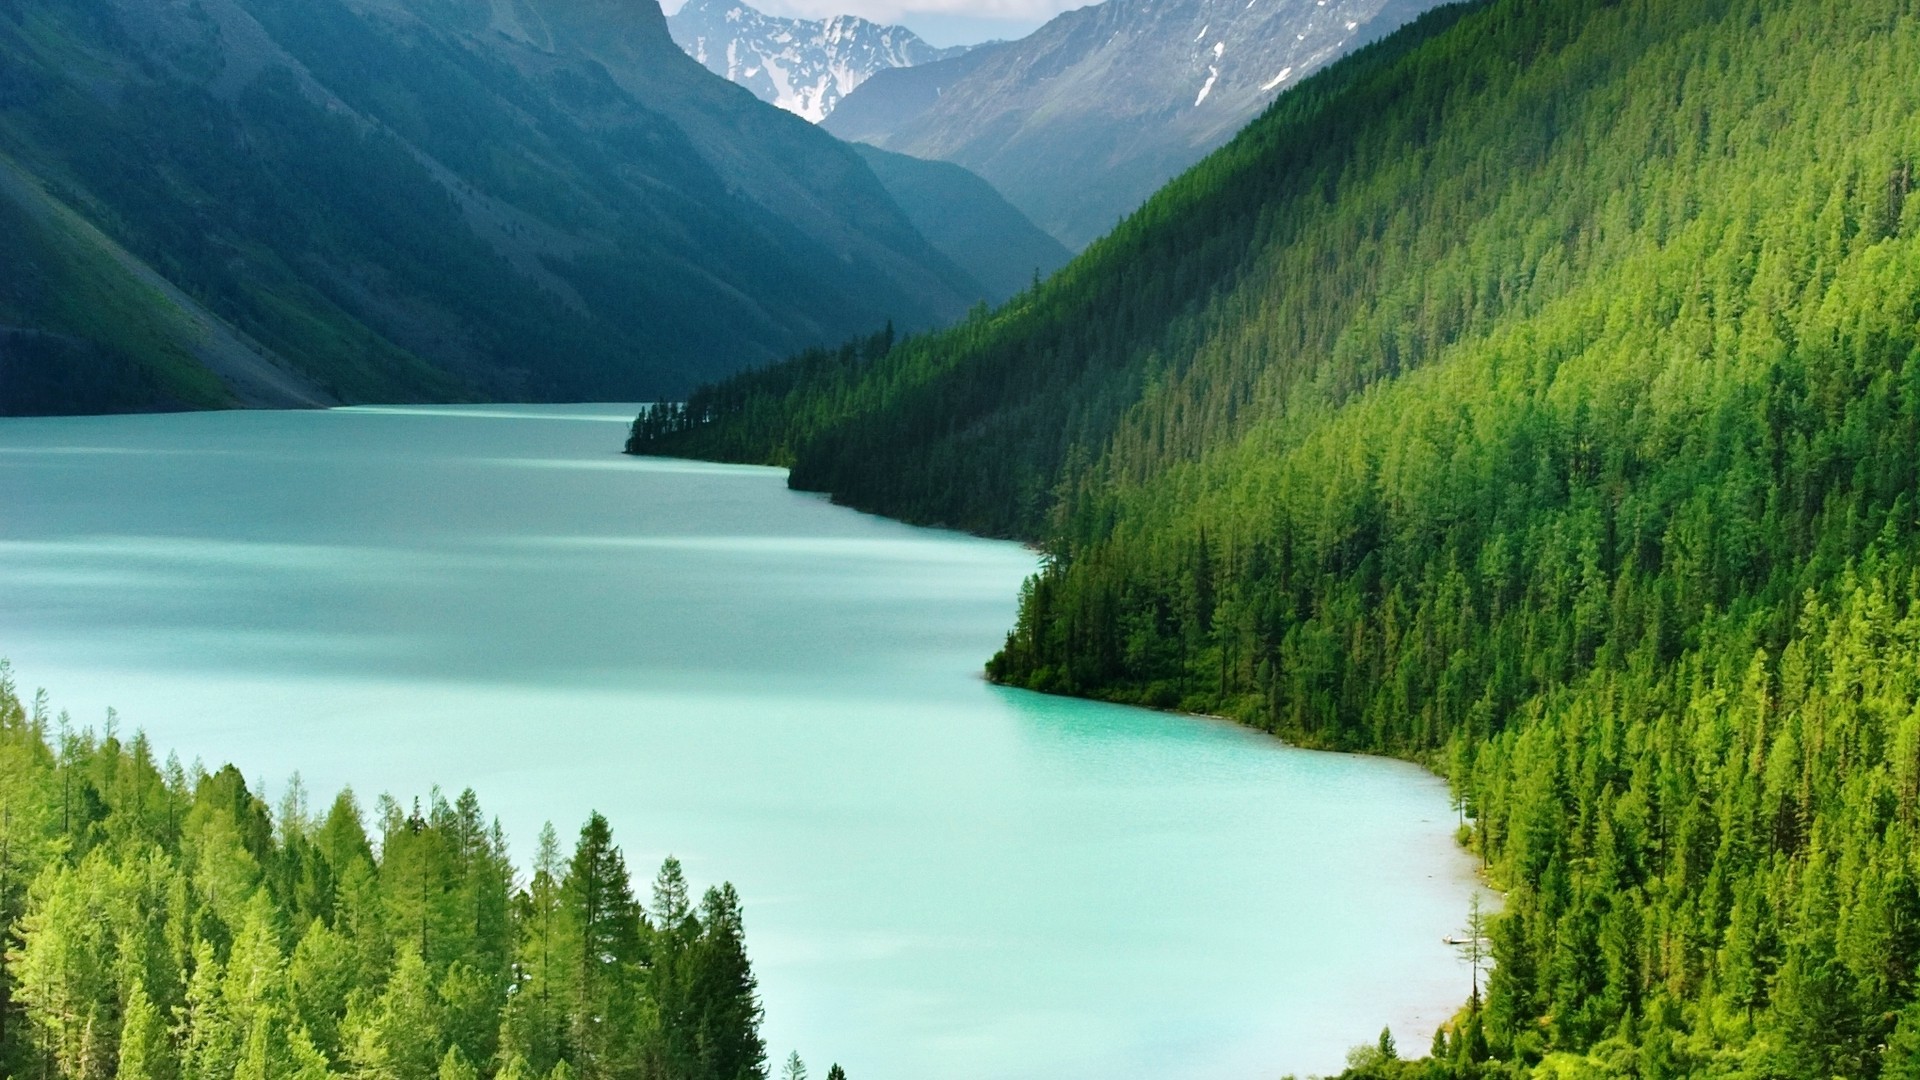 General 1920x1080 landscape mountains water nature trees lake